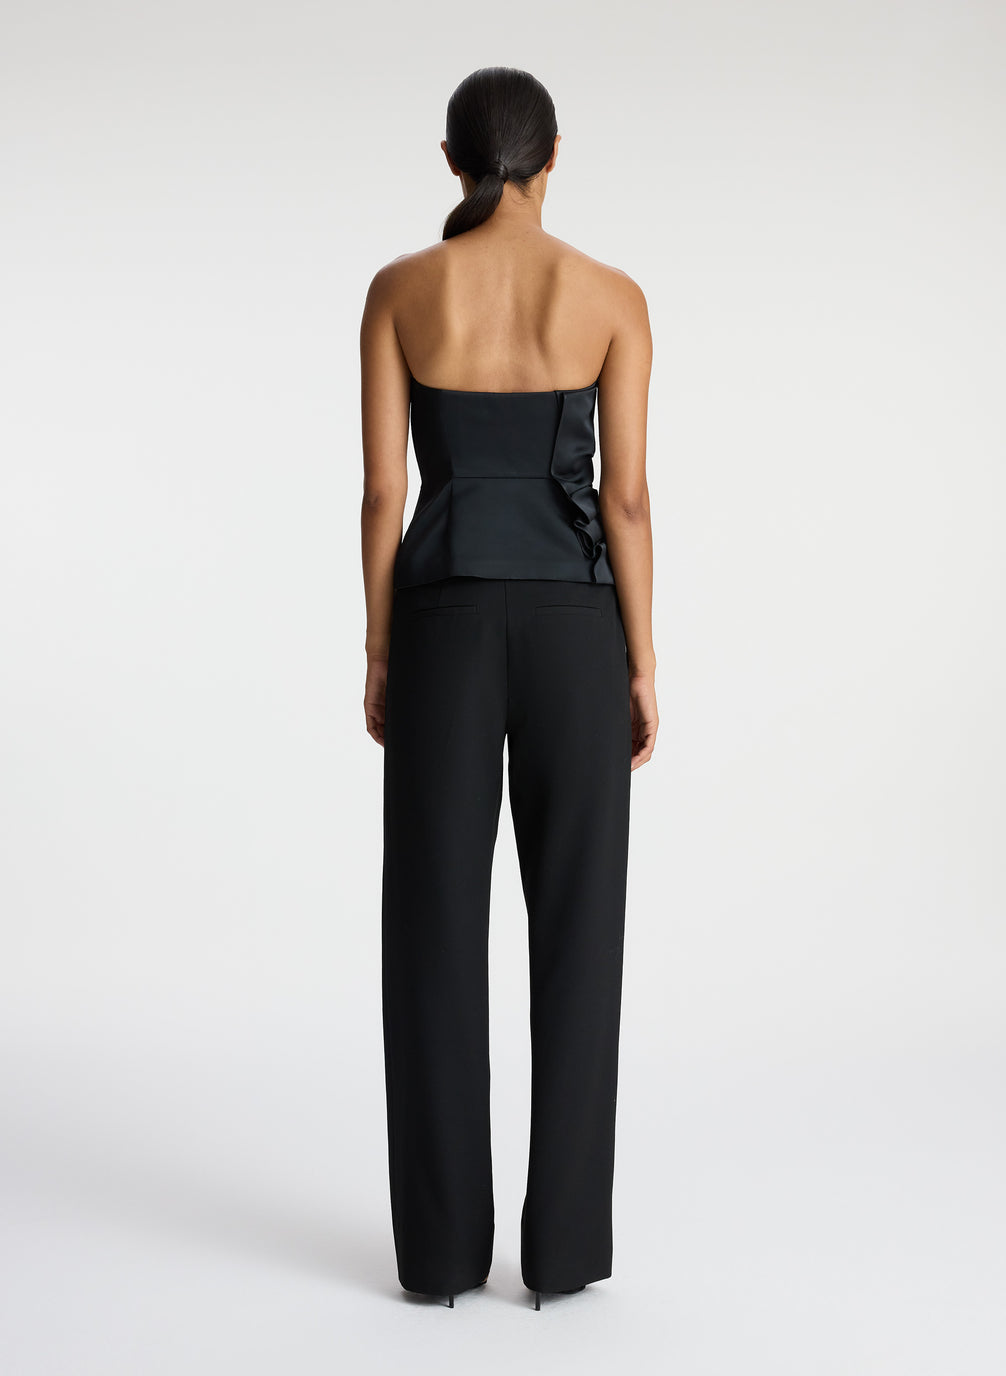 back  view of woman wearing black strapless satin top and black pants